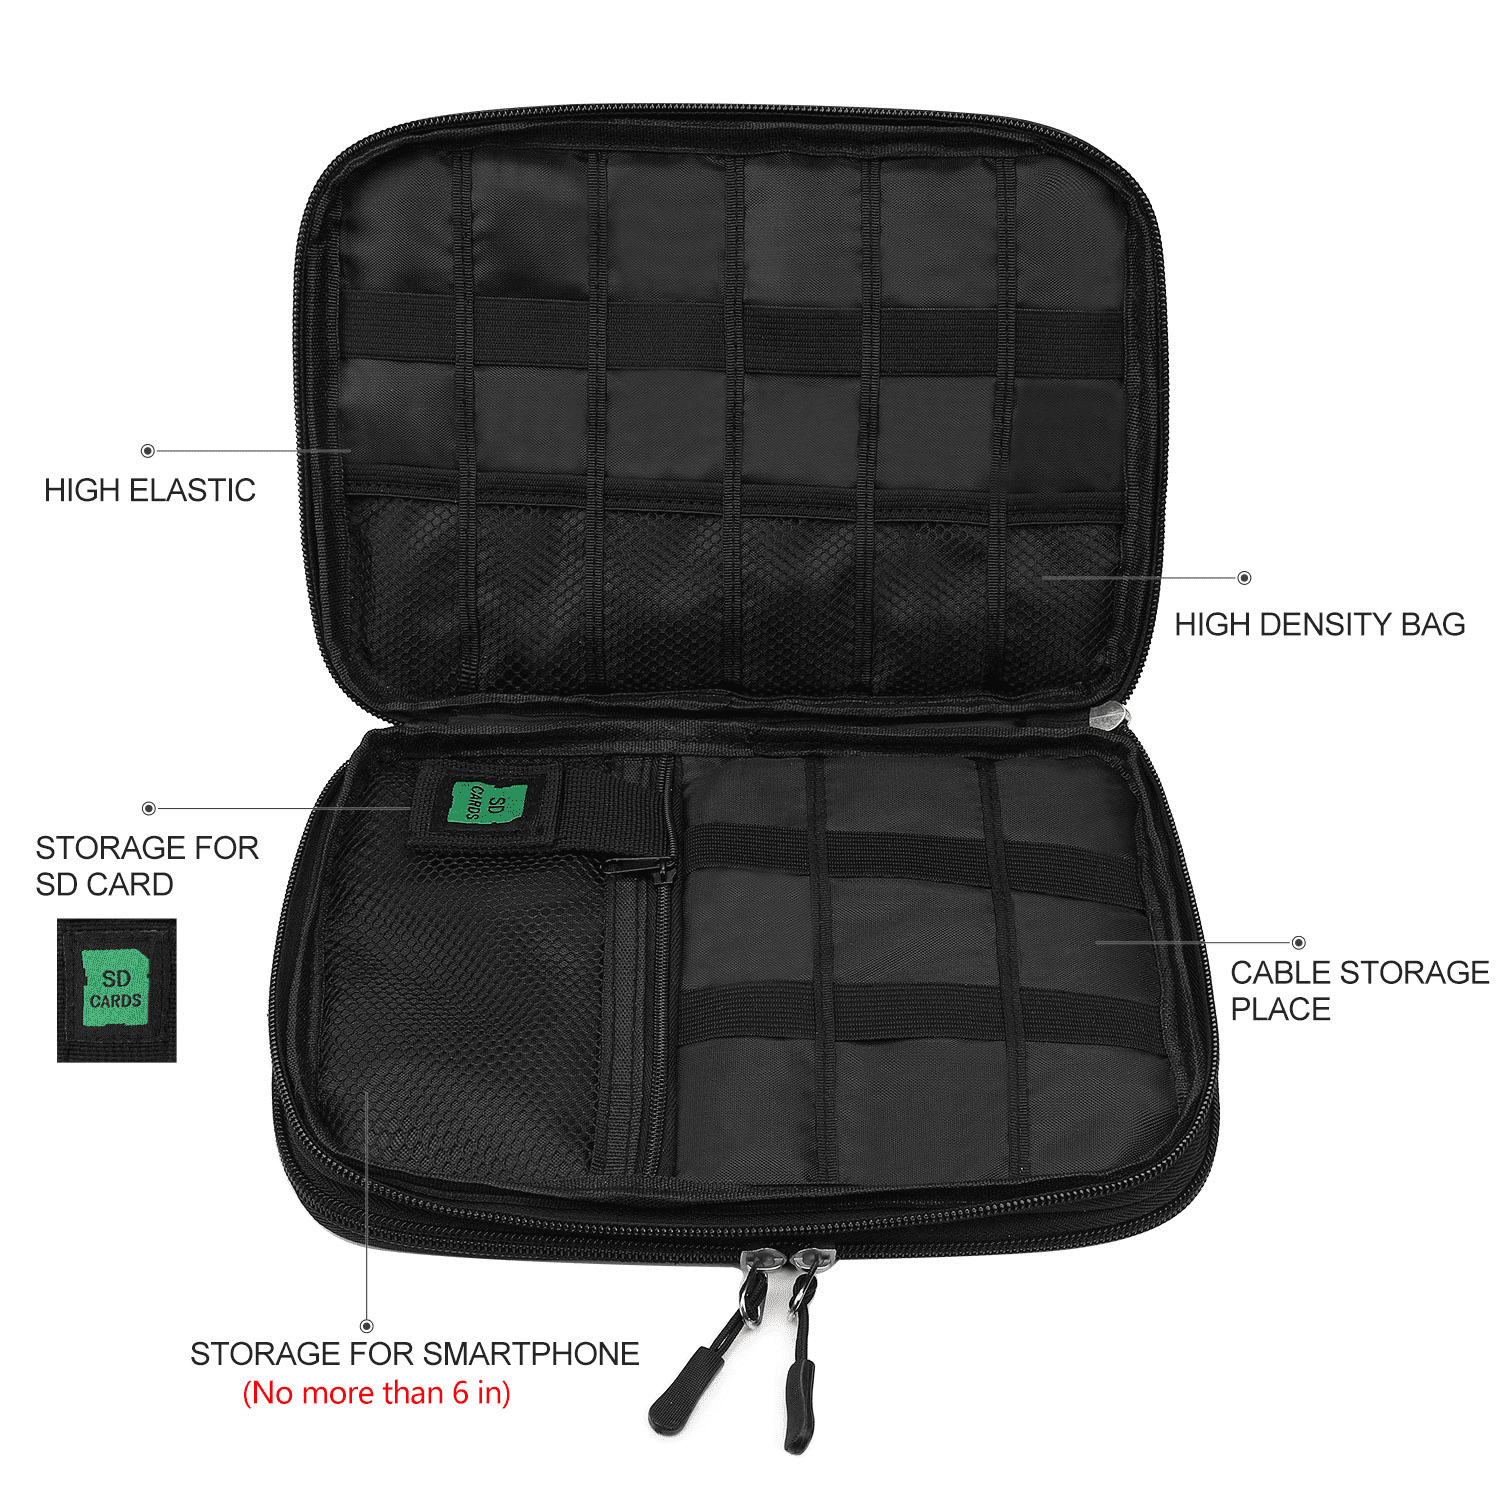 Tika Electronics Organizer Electronic Accessories Double Layer Travel Cable Organizer Gadget Carry Bag, Black